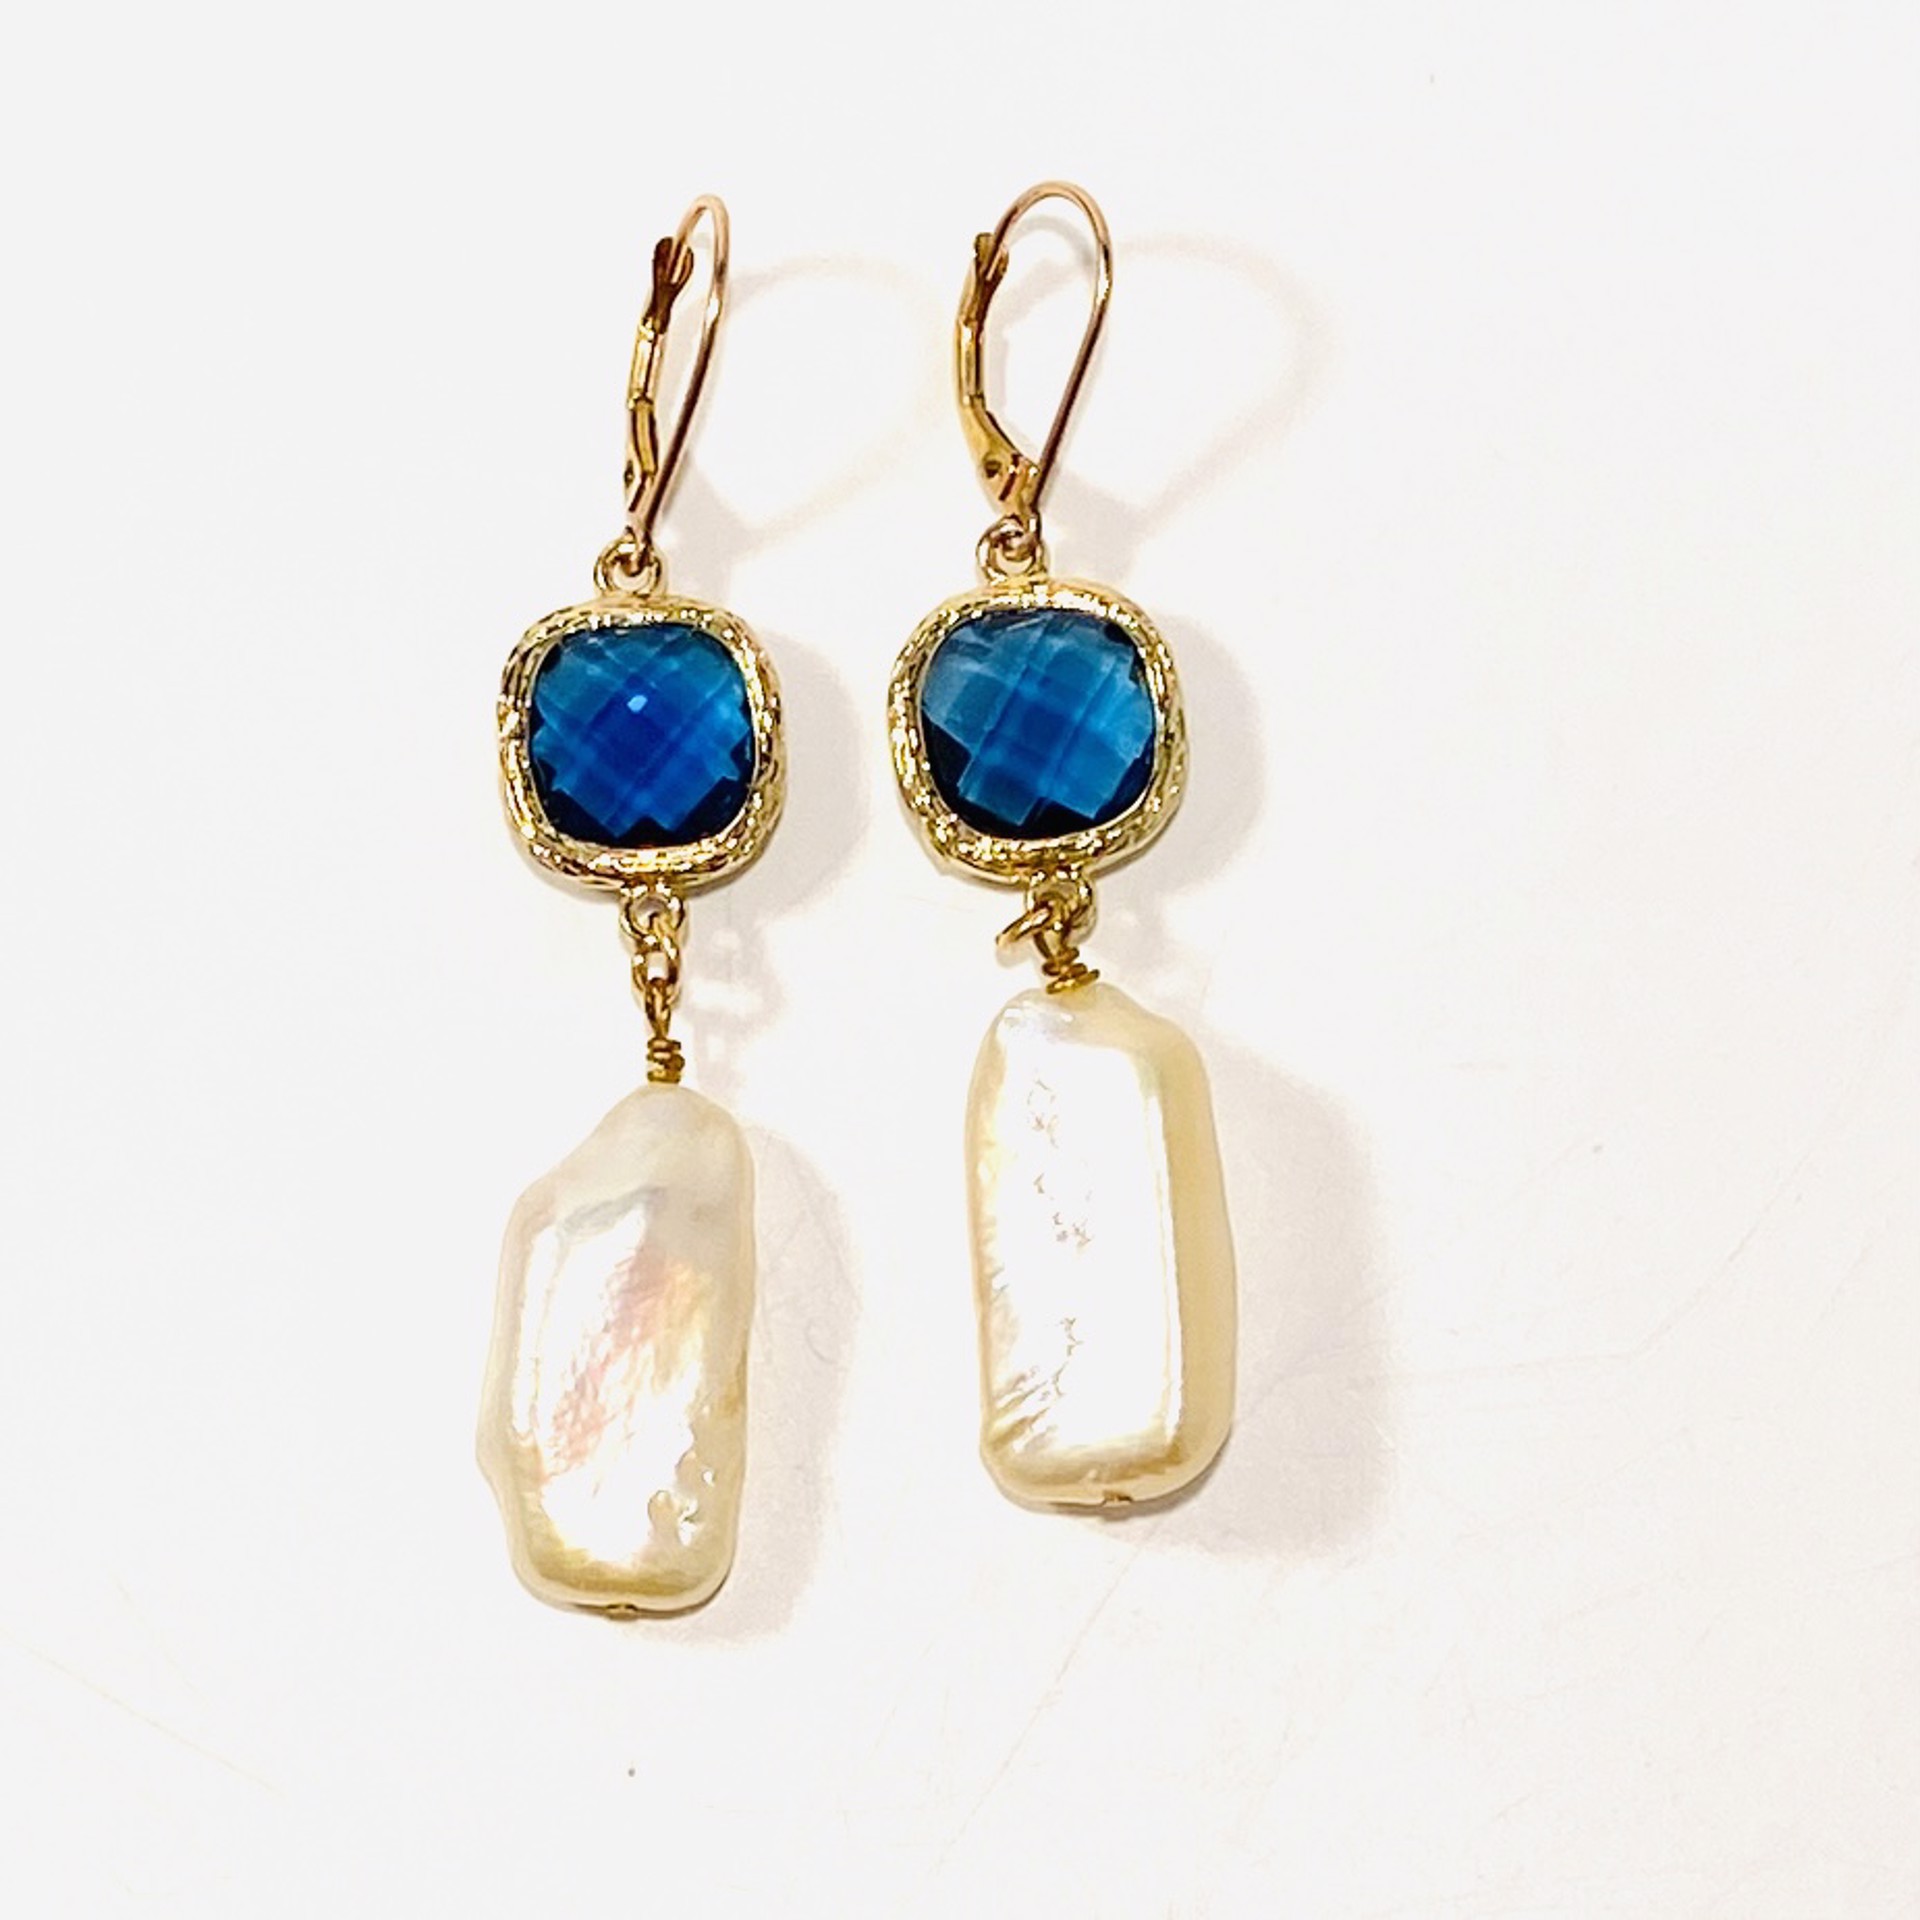 Blue Crystal, Large Pearl Drop Earrings LR23-31 by Legare Riano